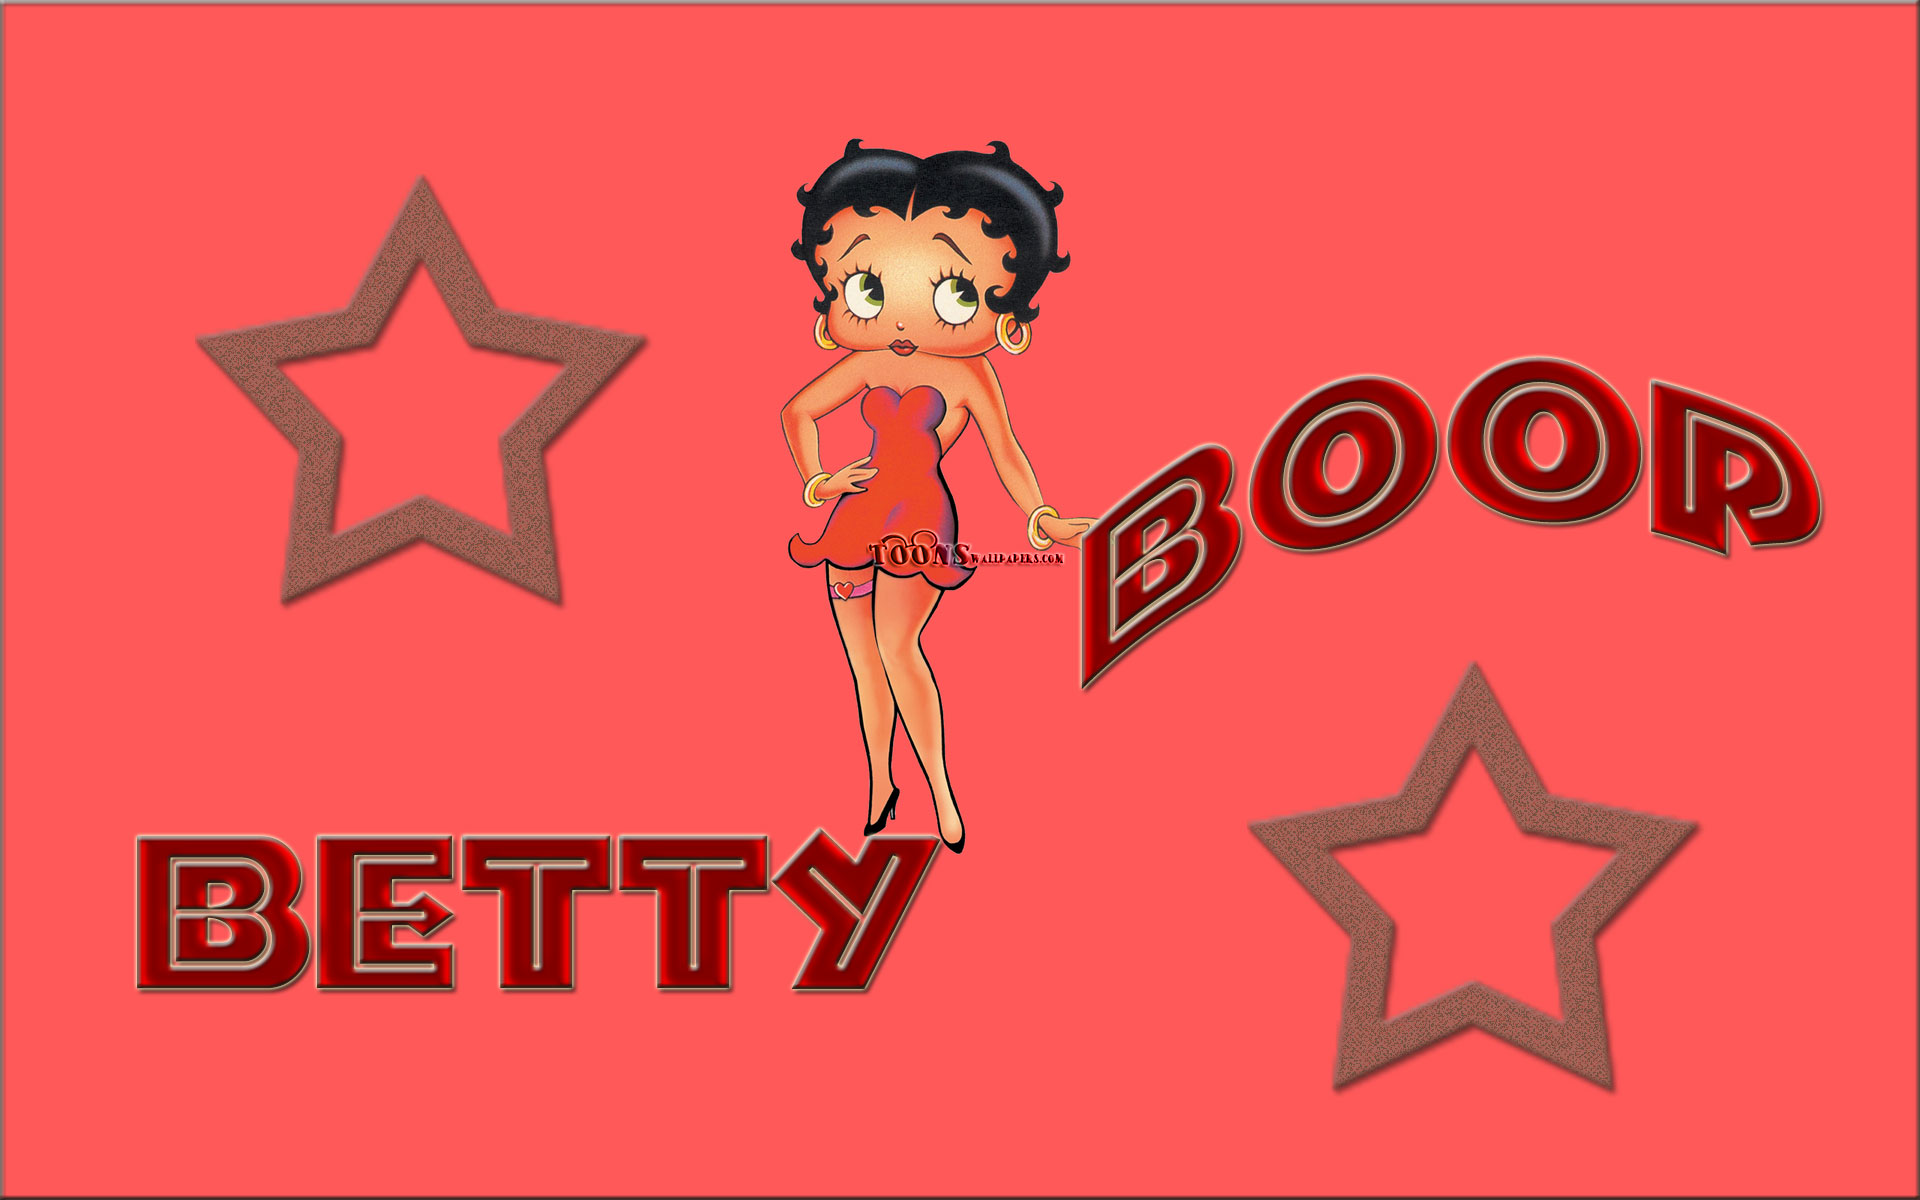 Free Download Image Betty Boop Desktop Pc Android Iphone And Ipad Wallpapers 19x10 For Your Desktop Mobile Tablet Explore 50 Free Betty Boop Desktop Wallpaper Betty Boop Desktop Wallpaper